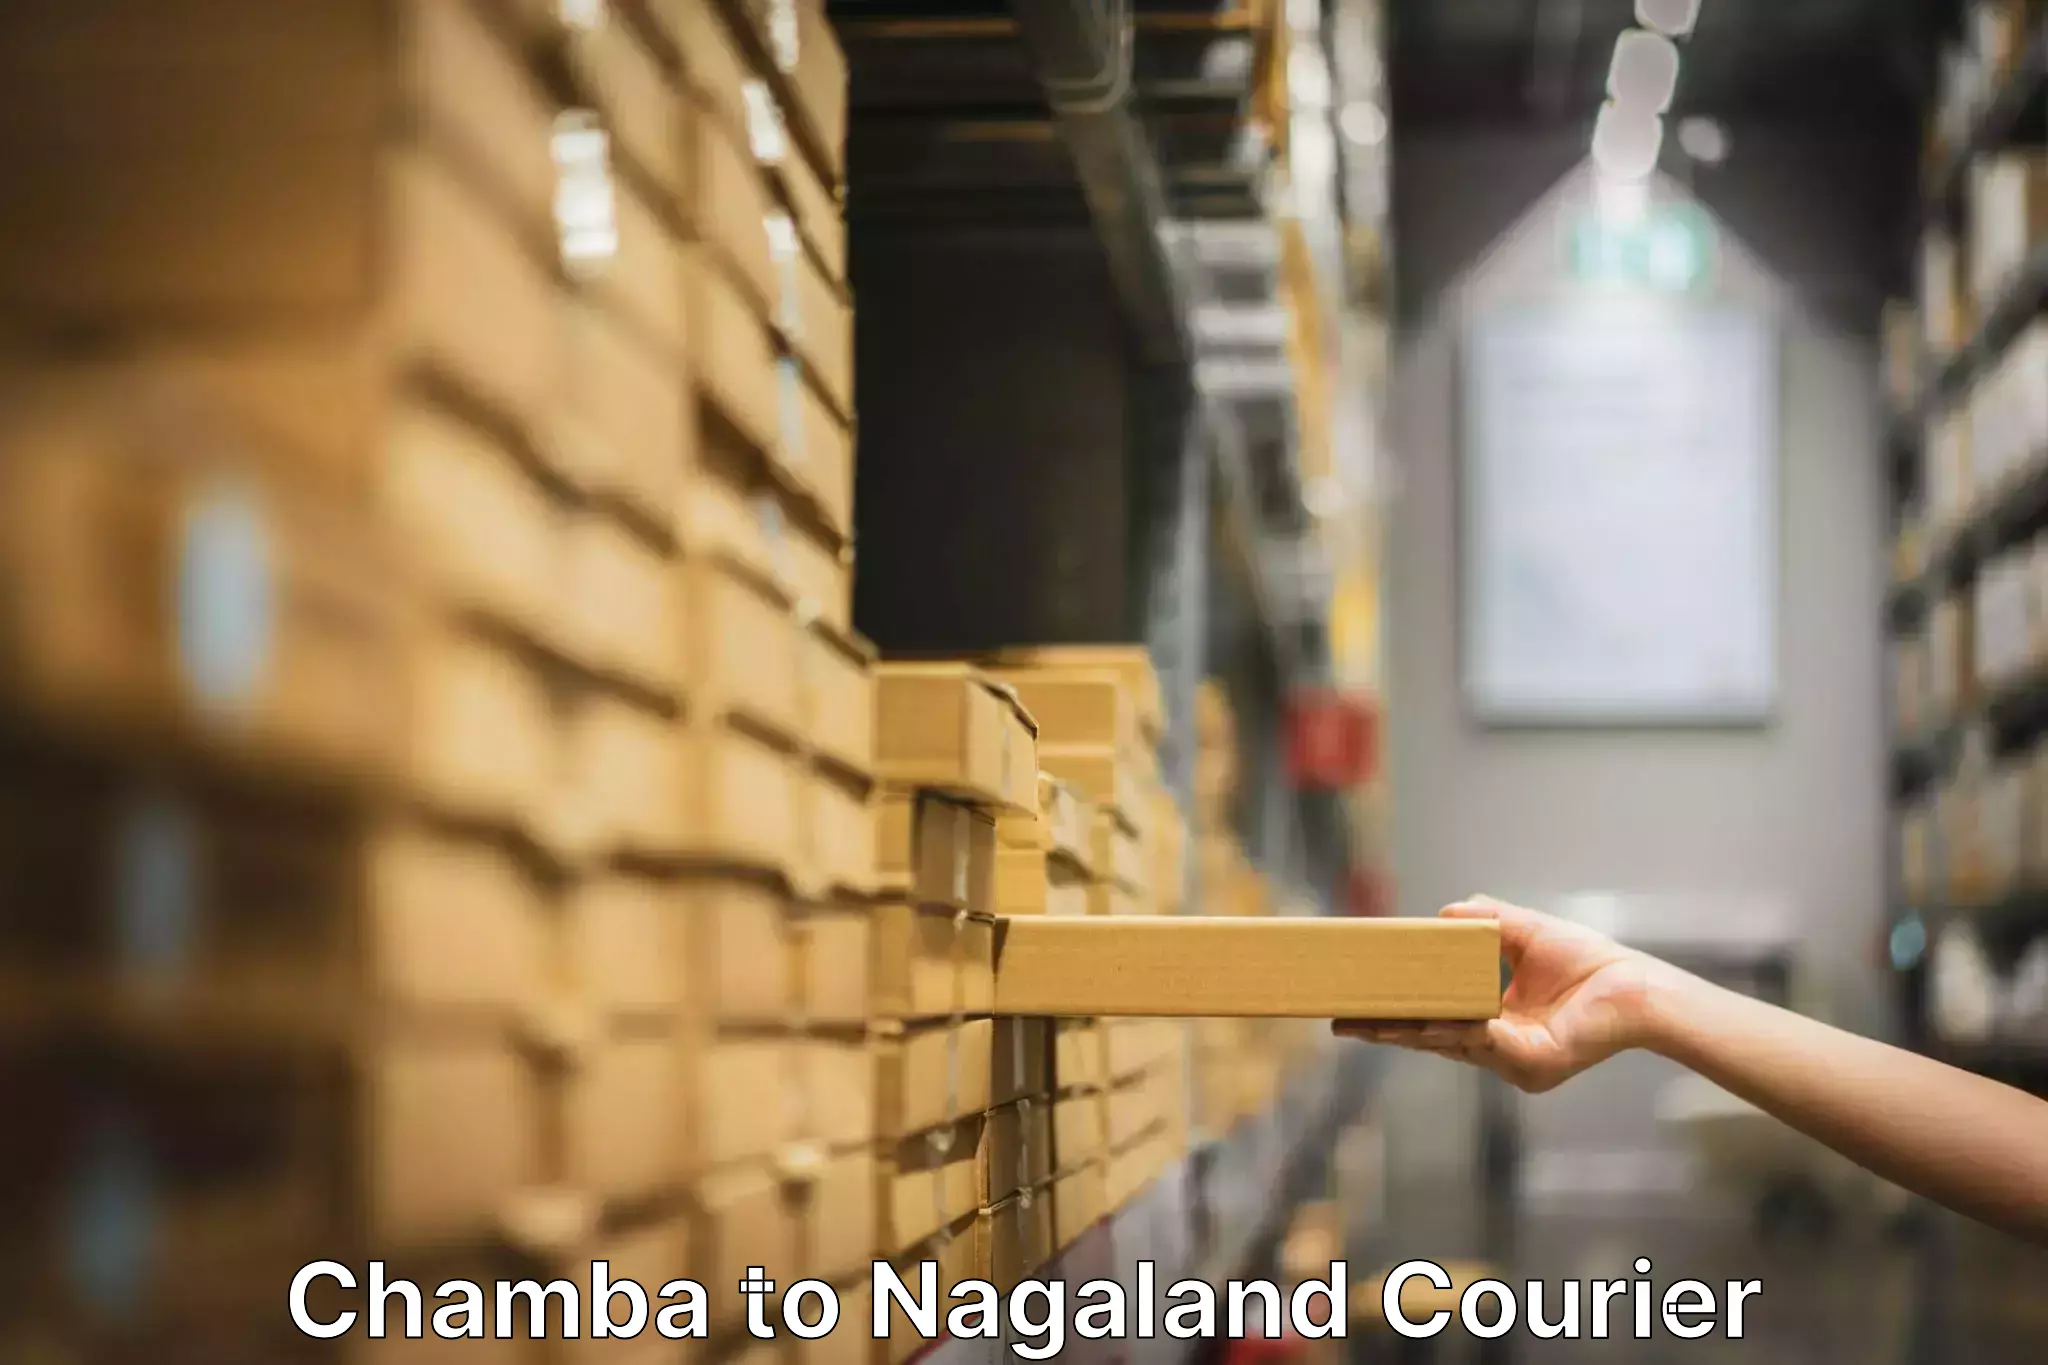 Trusted relocation experts Chamba to Nagaland